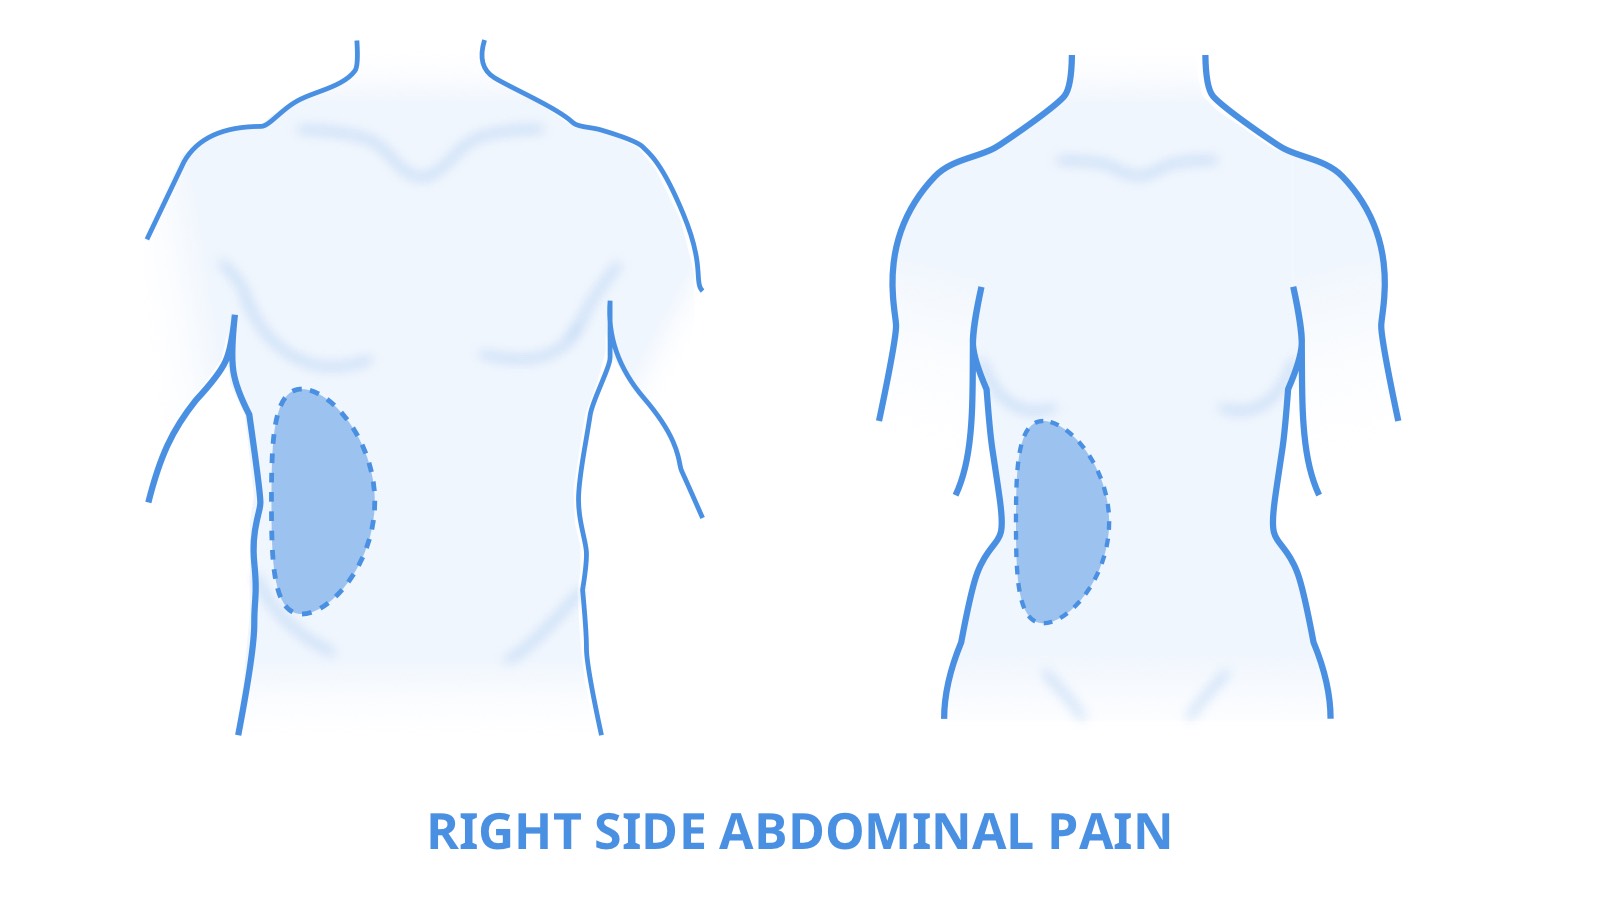 Image highlighting the right side of the abdomen